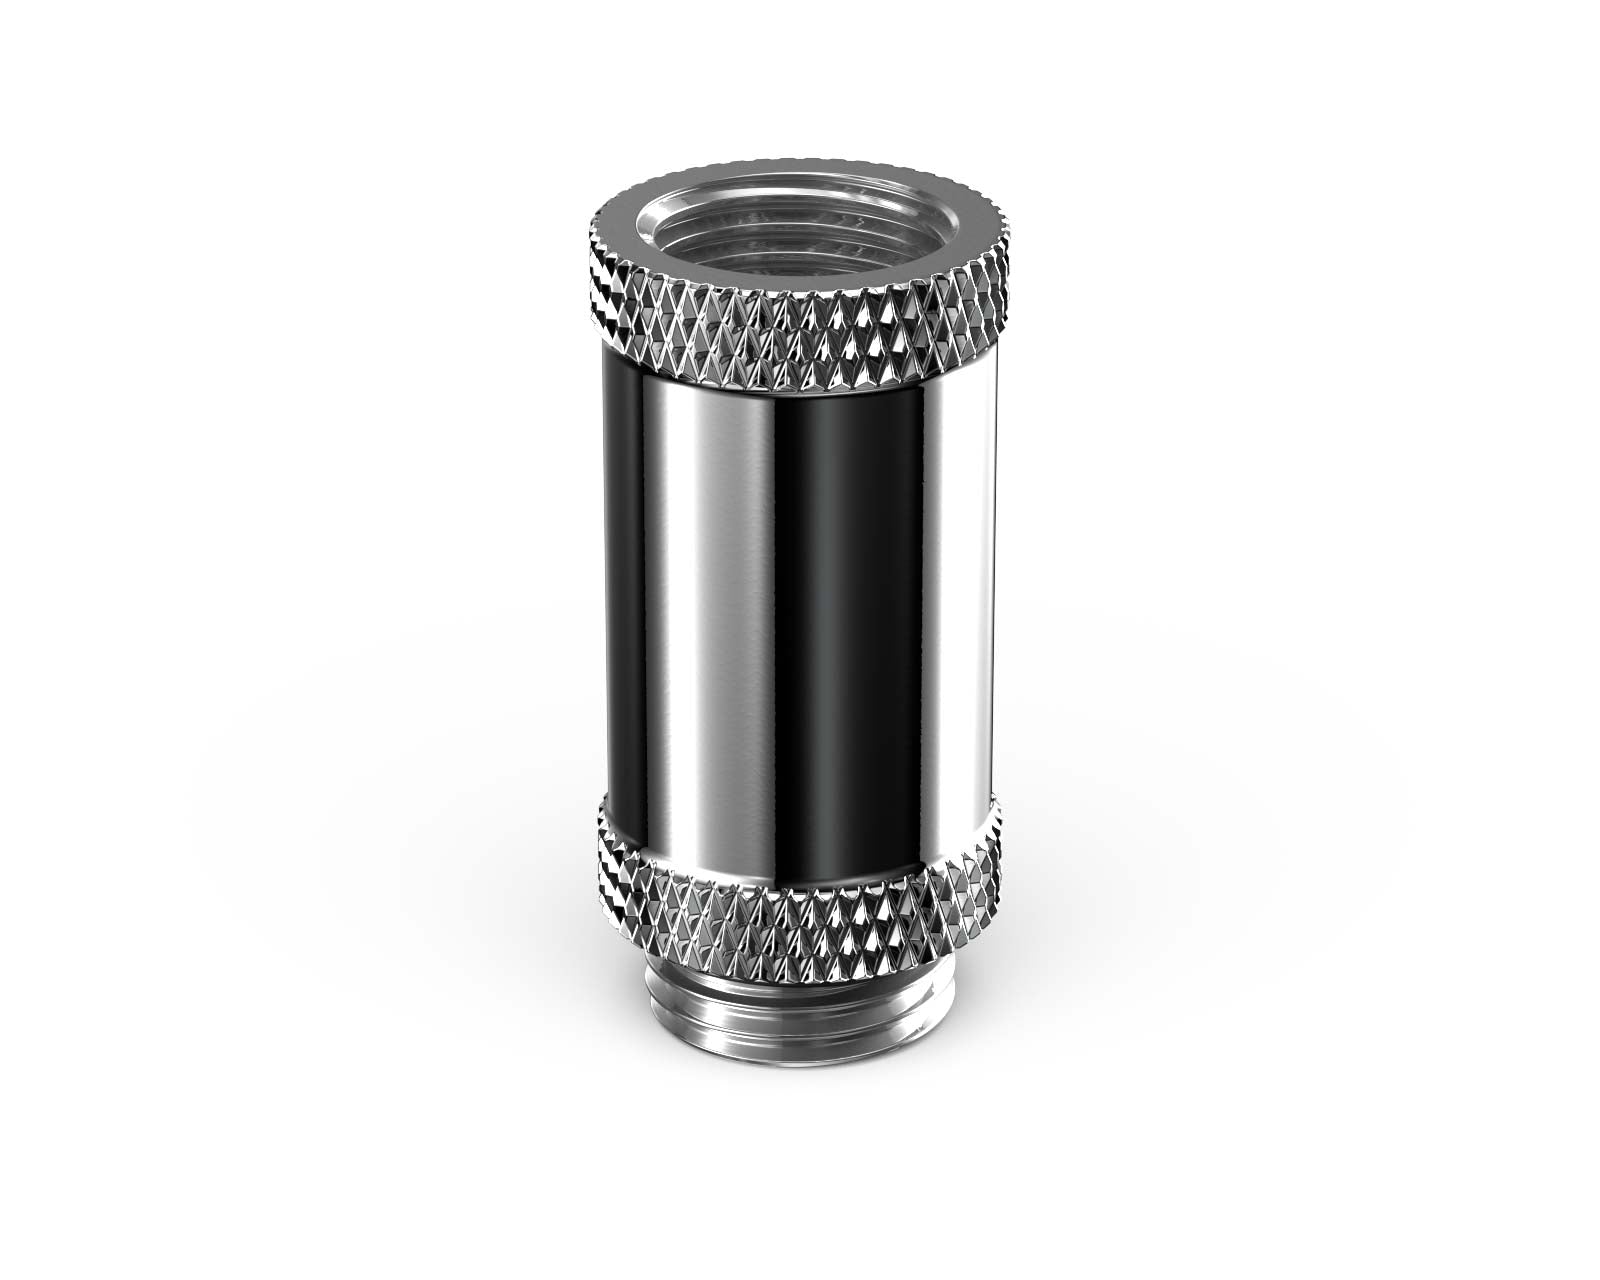 PrimoChill Male to Female G 1/4in. 30mm SX Extension Coupler - PrimoChill - KEEPING IT COOL Silver Nickel